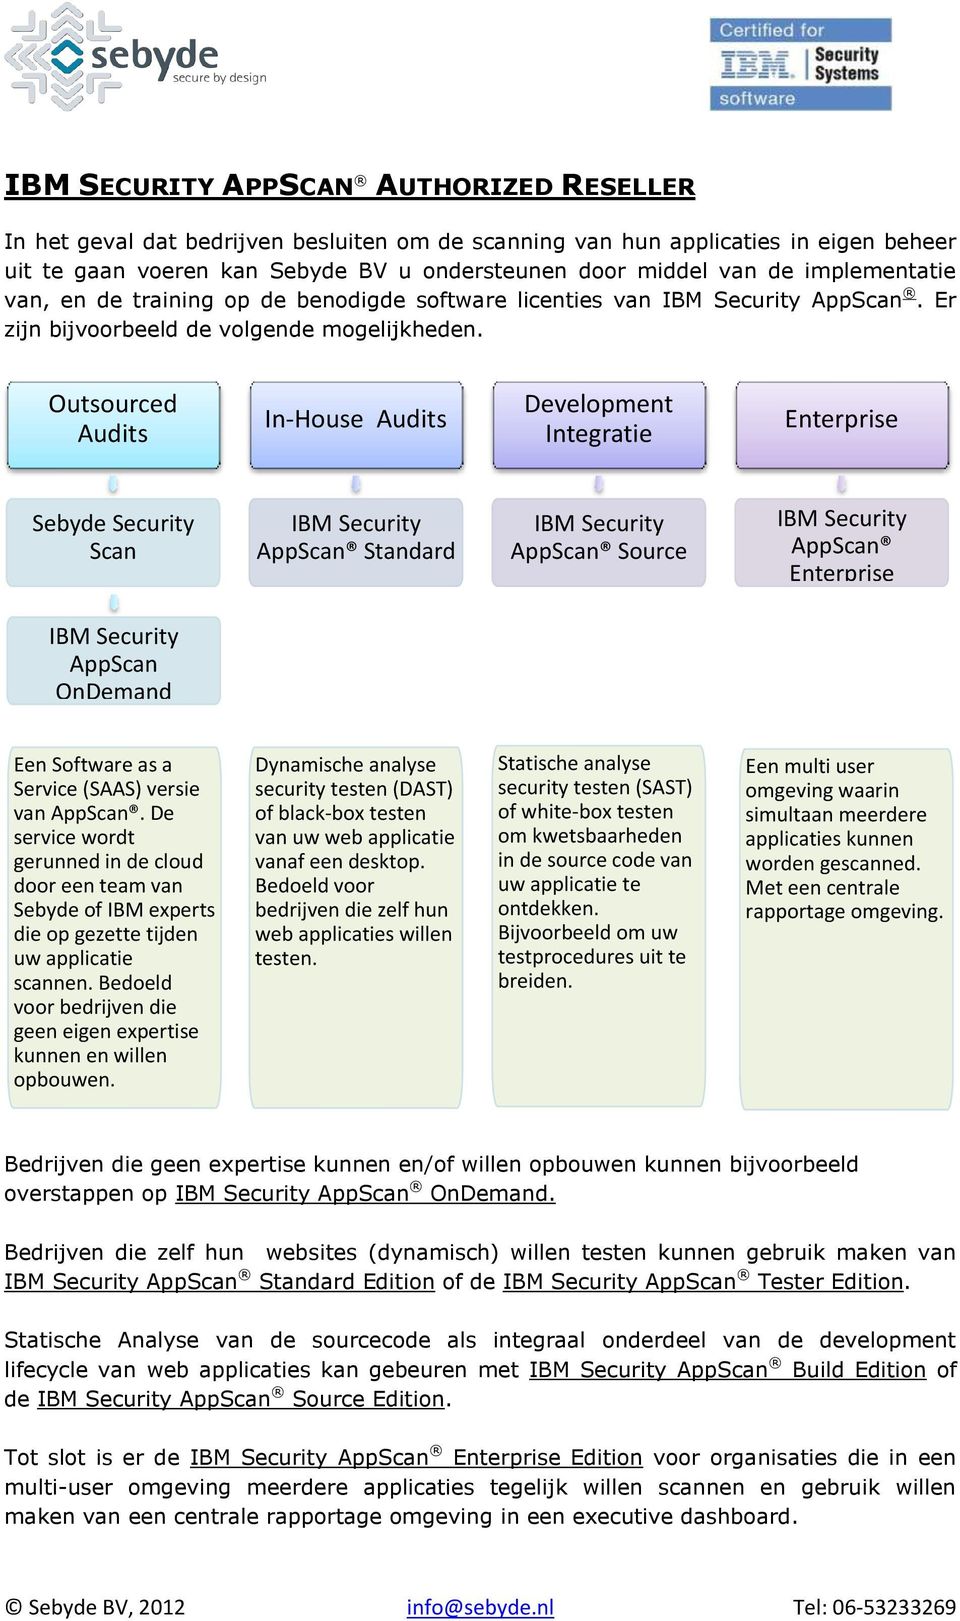 Outsourced Audits In-House Audits Development Integratie Enterprise Sebyde Security Scan IBM Security AppScan Standard IBM Security AppScan Source IBM Security AppScan Enterprise IBM Security AppScan